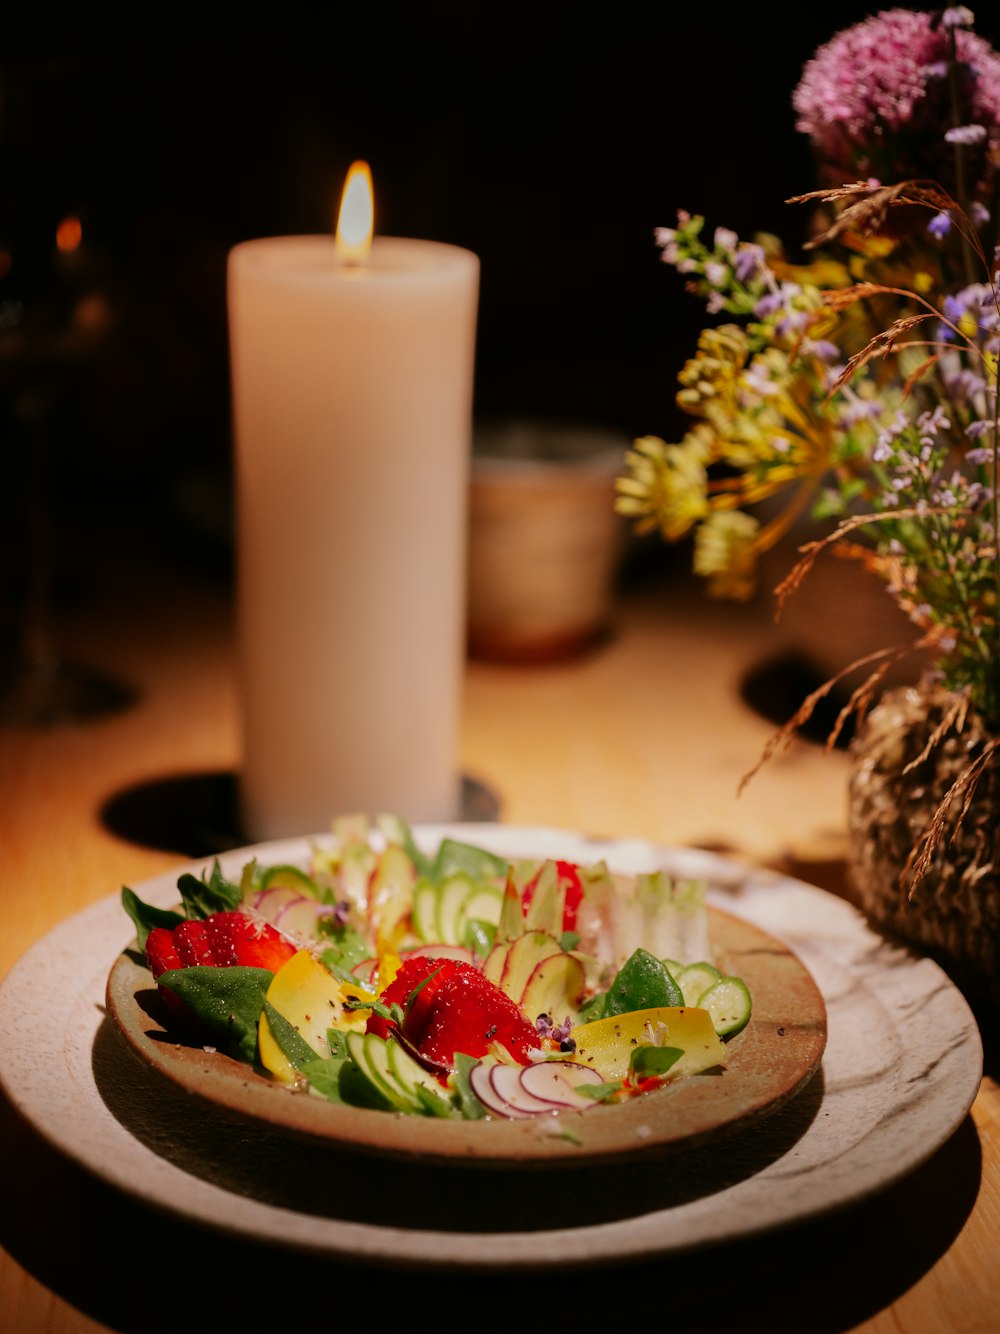 a plate of food on a table next to a candle